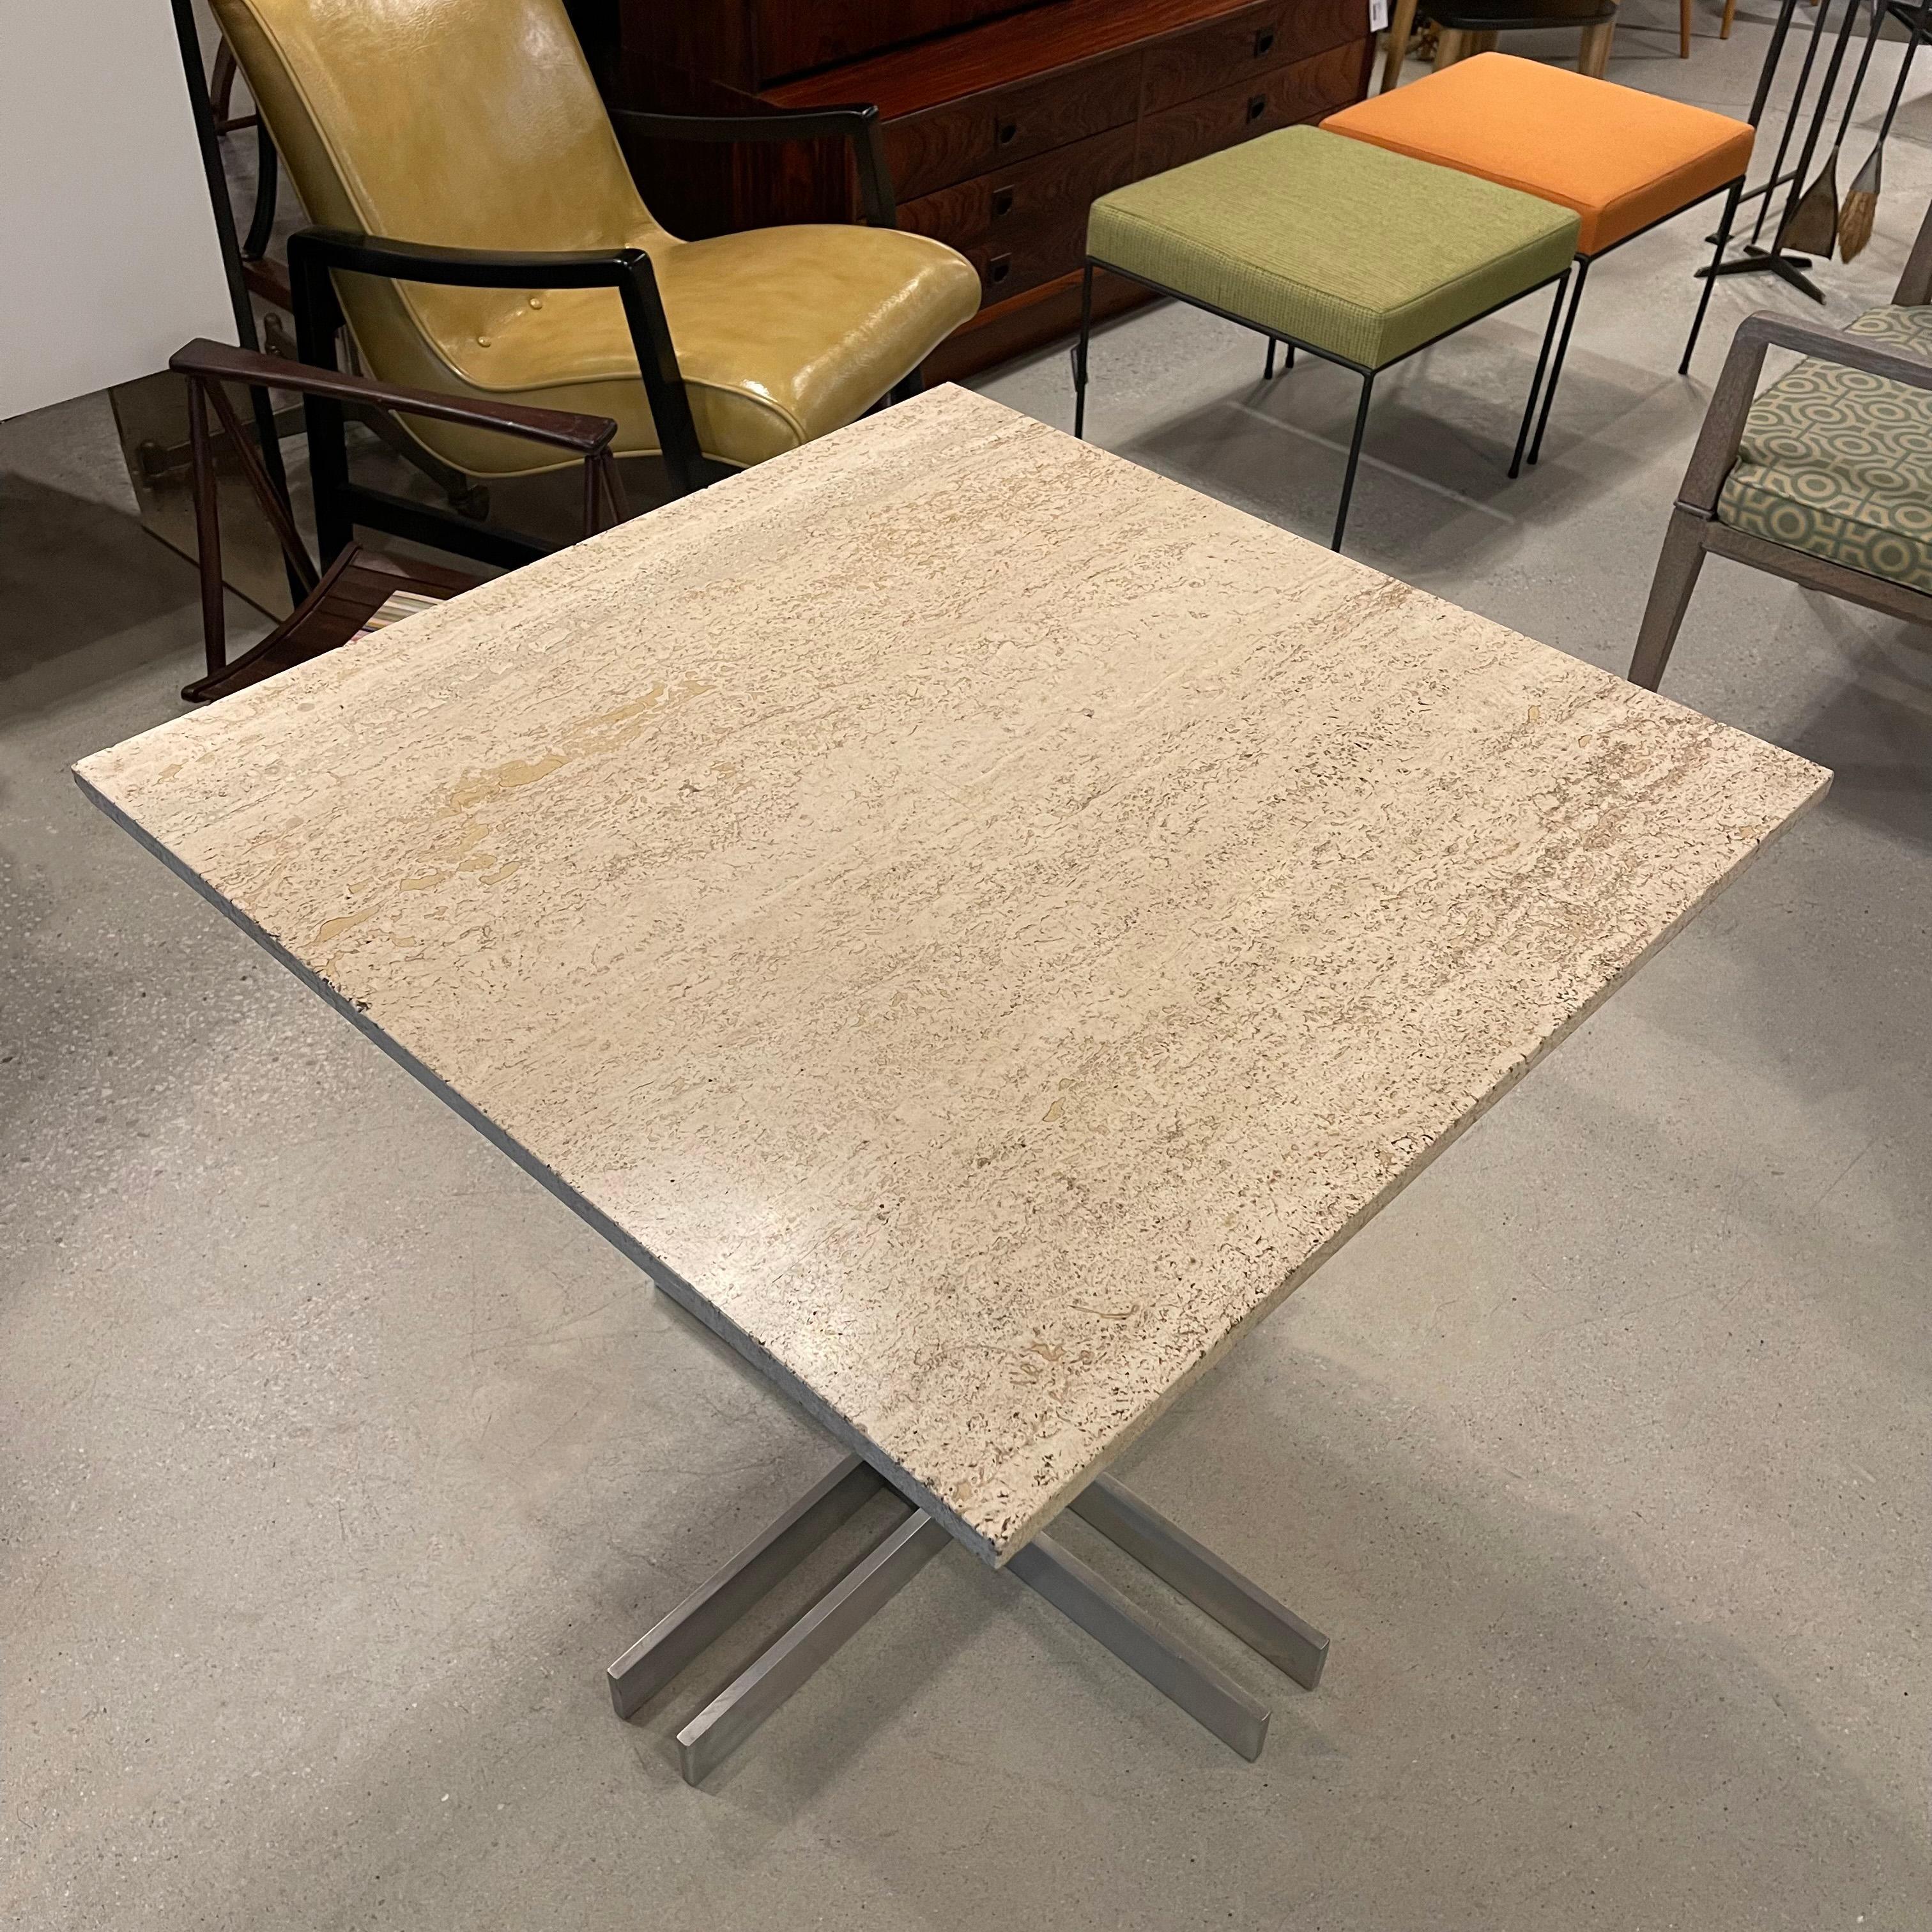 Aluminum Post Modern Travertine Dining Cafe Table For Sale